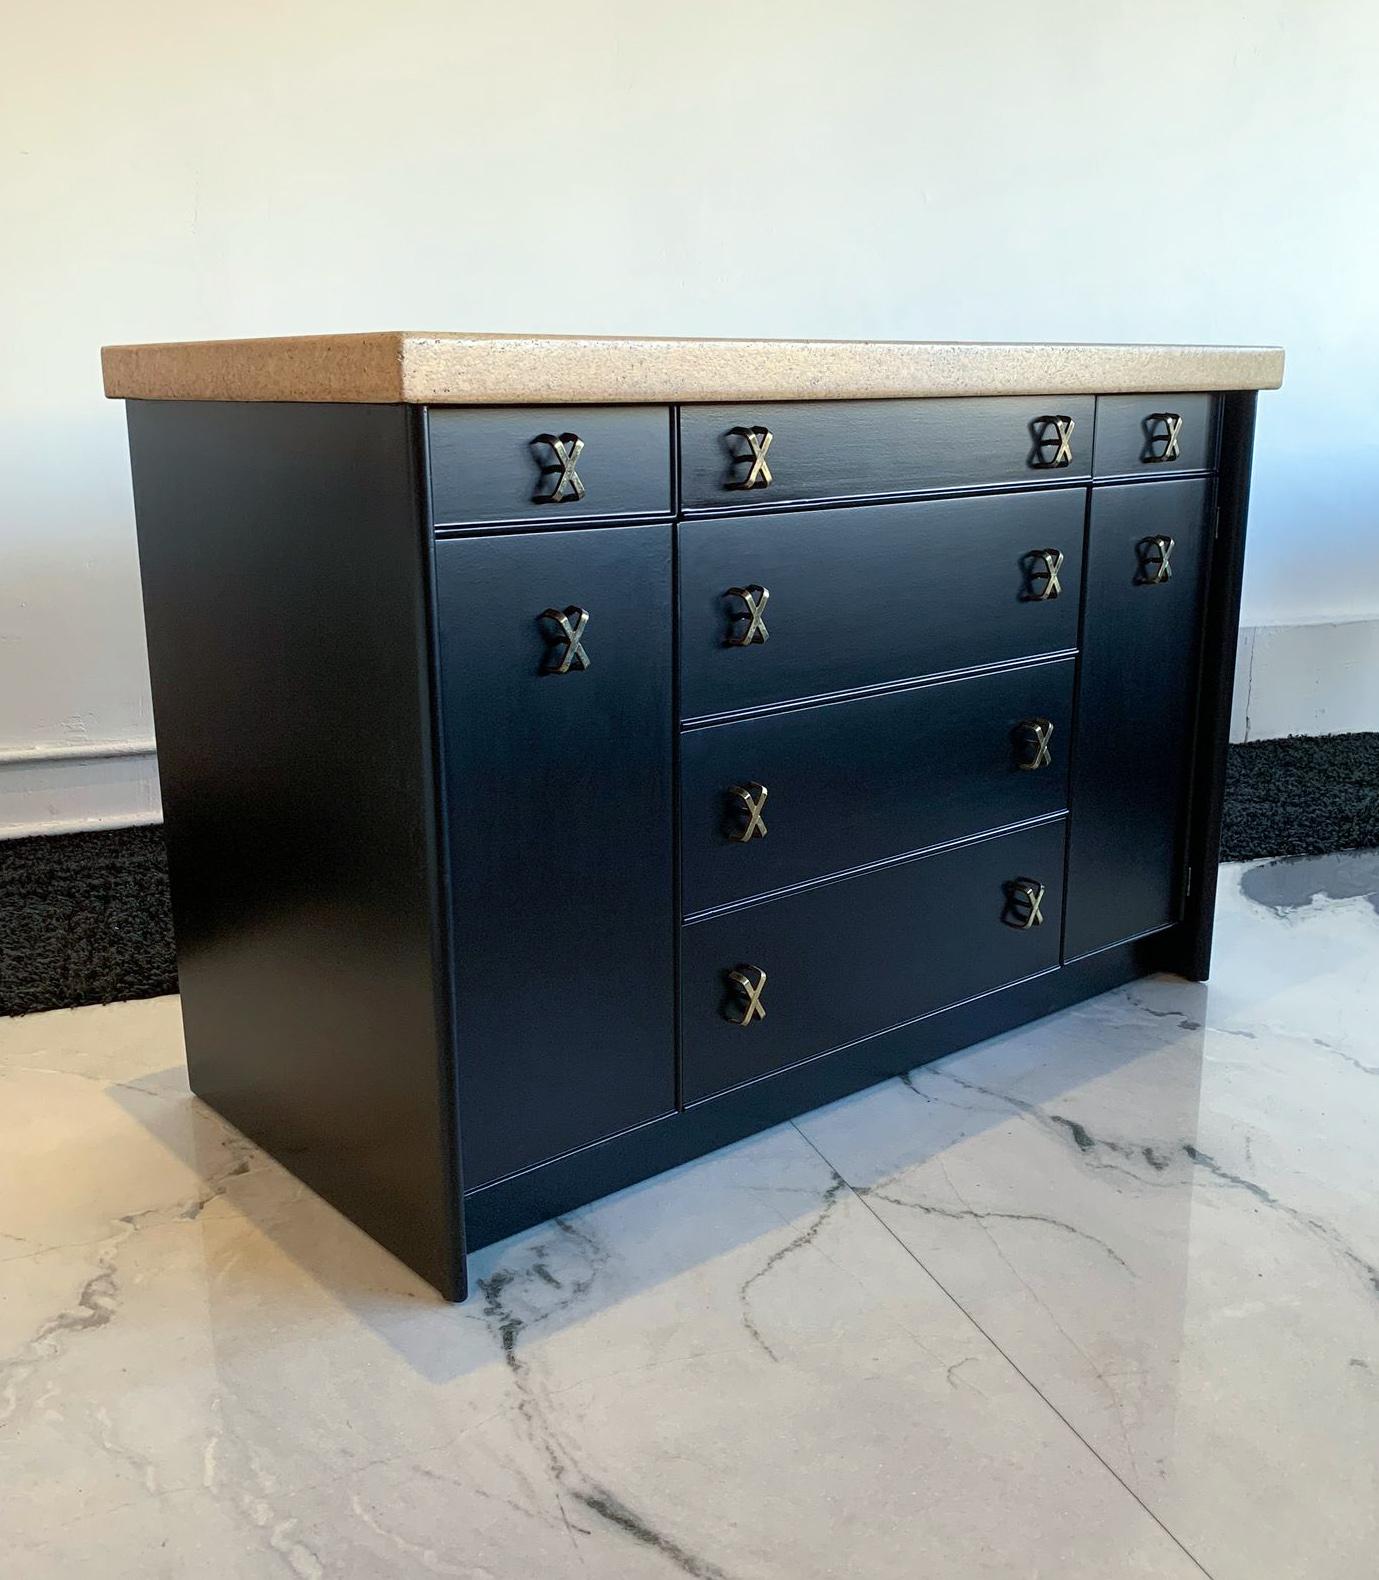 These pieces are absolutely stunning! Professionally restored, this Paul Frankl for Johnson Furniture, distributed by John Stuart sideboard cabinet with matching hutch top is incredibly rare and strikingly beautiful.

These Paul Frankl pieces